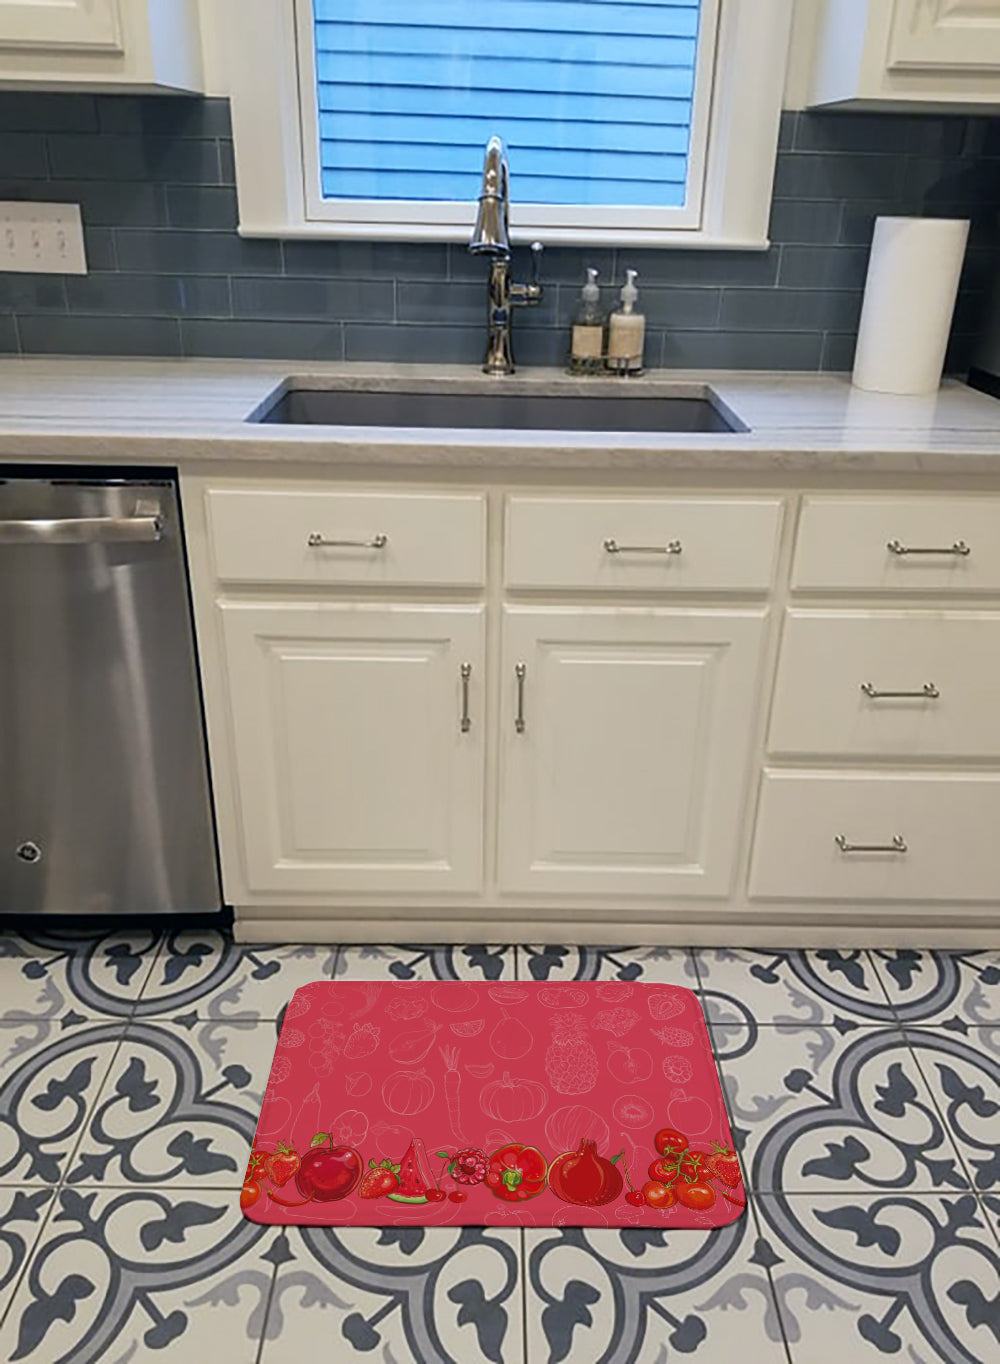 Fruits and Vegetables in Red Machine Washable Memory Foam Mat BB5133RUG - the-store.com